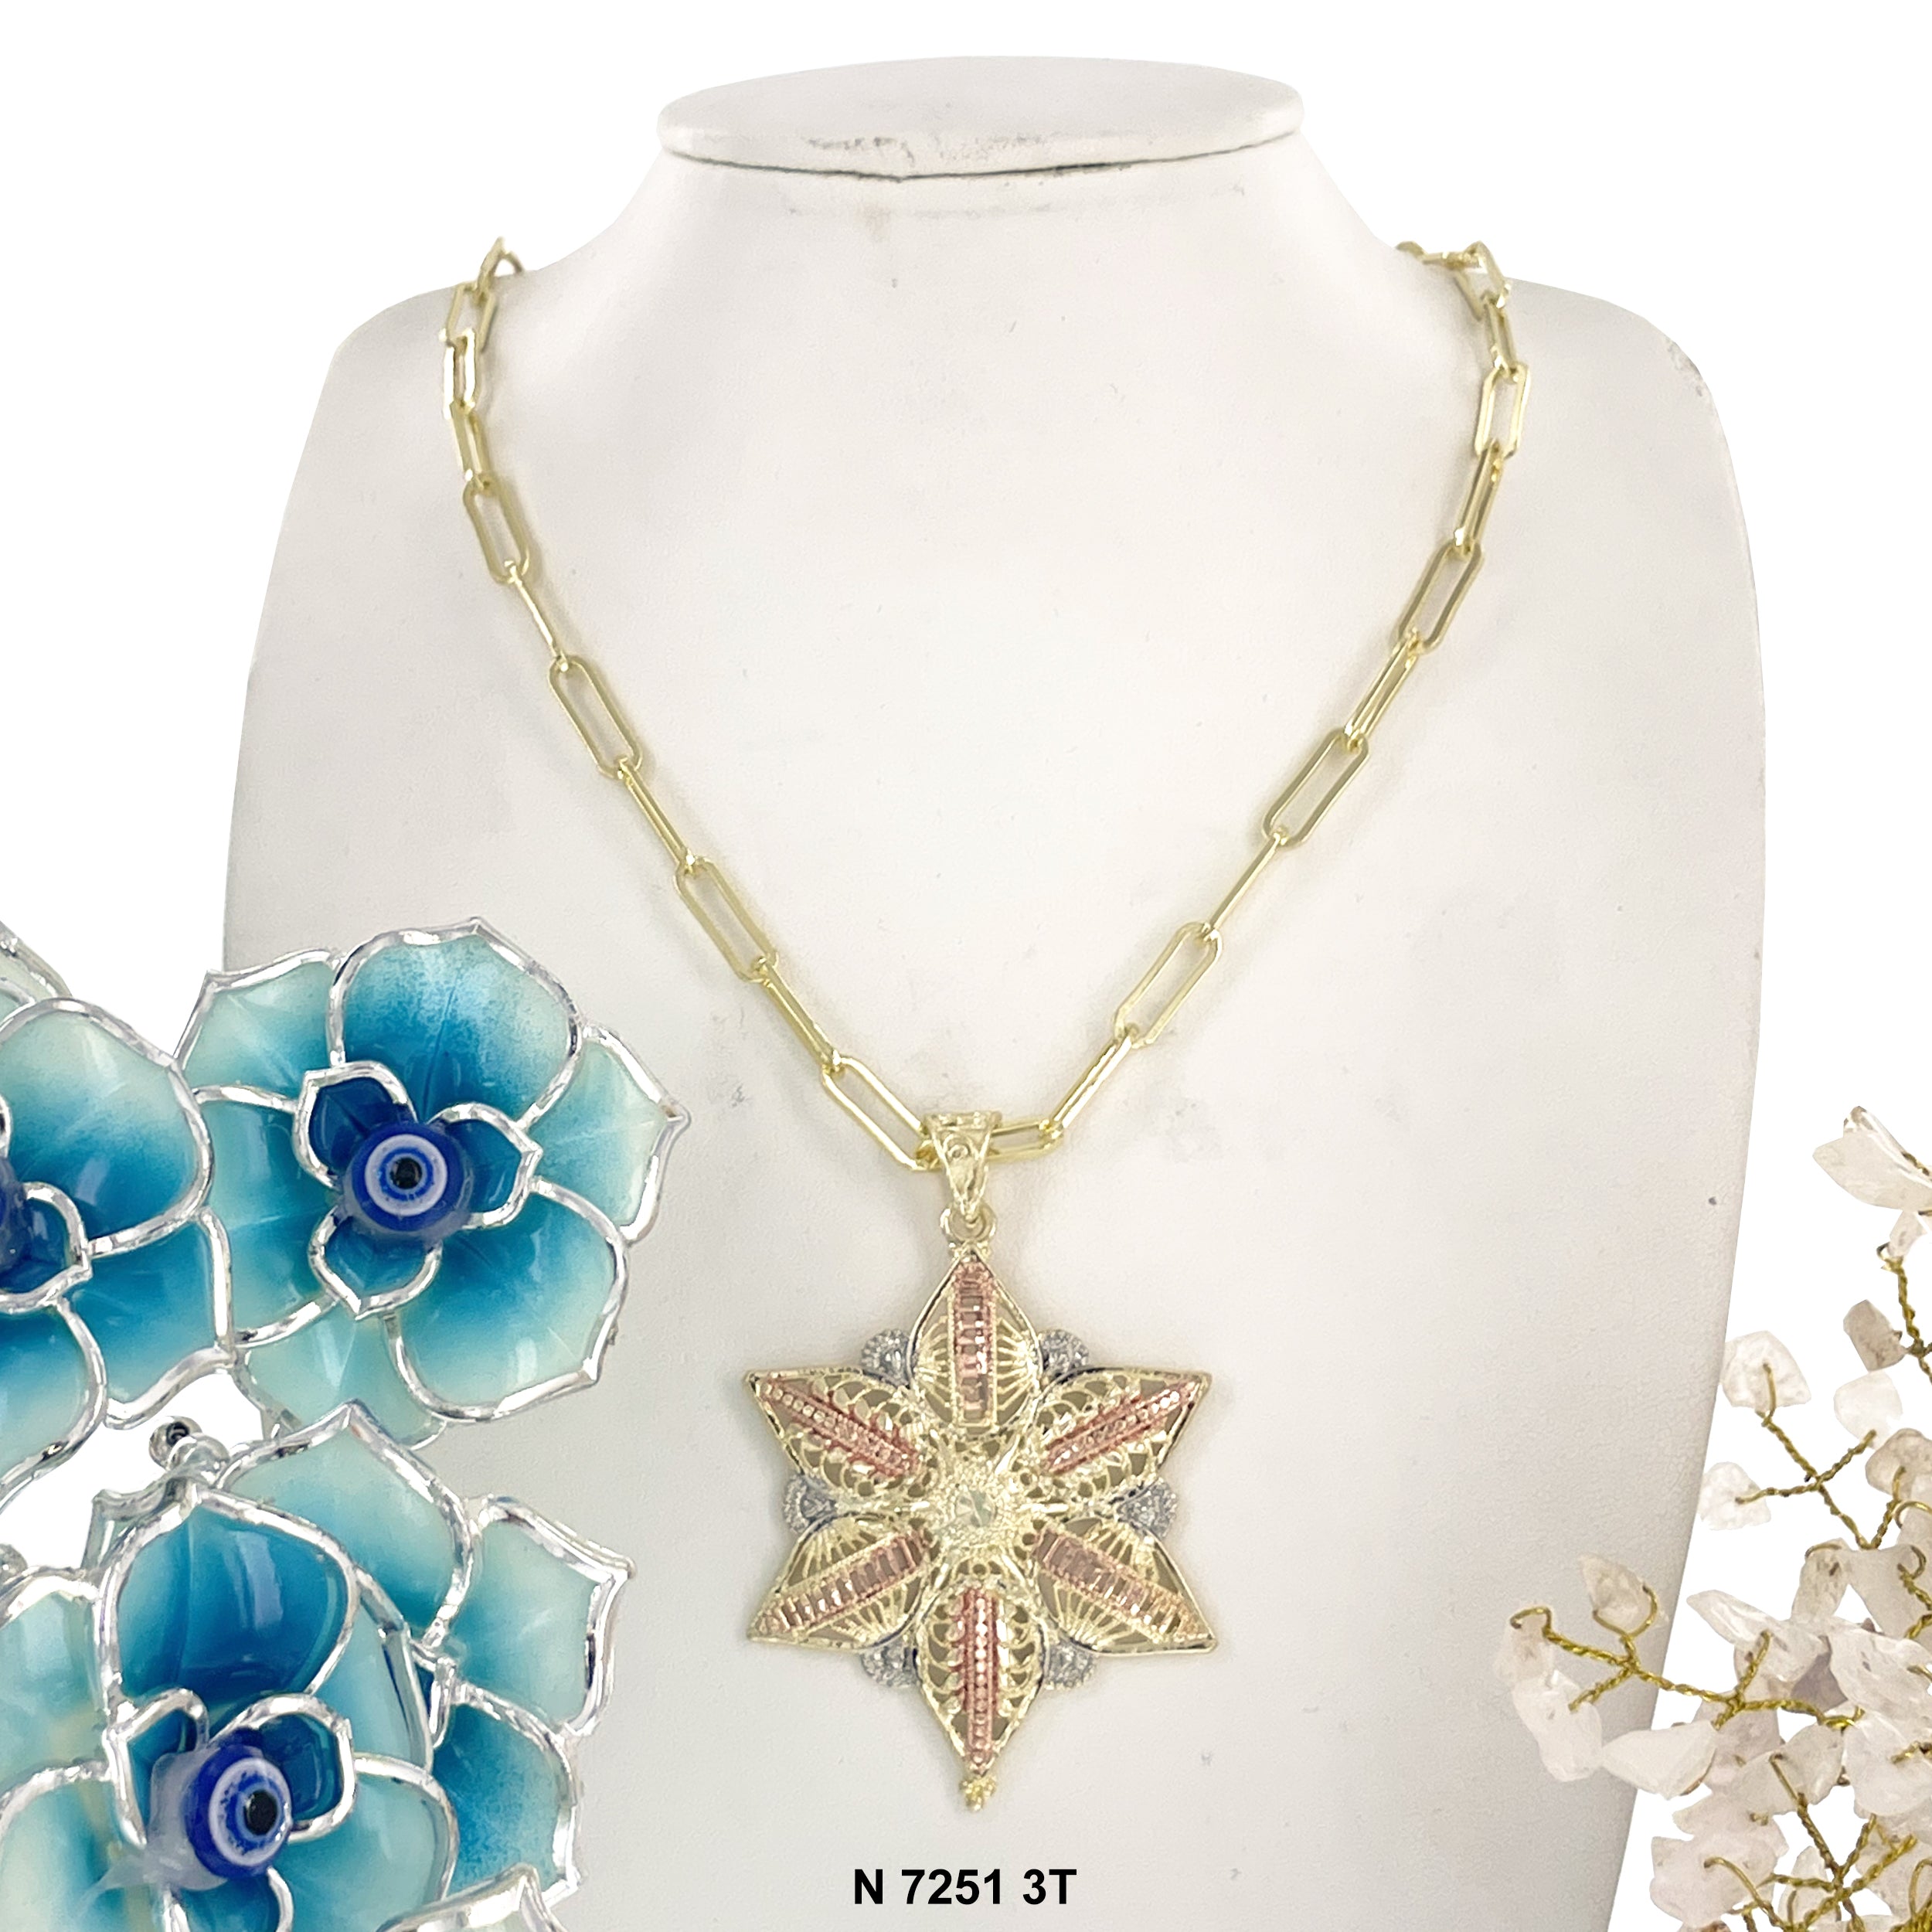 Star Flower Filigree Paper Clip Chain Necklace N 7251 3T